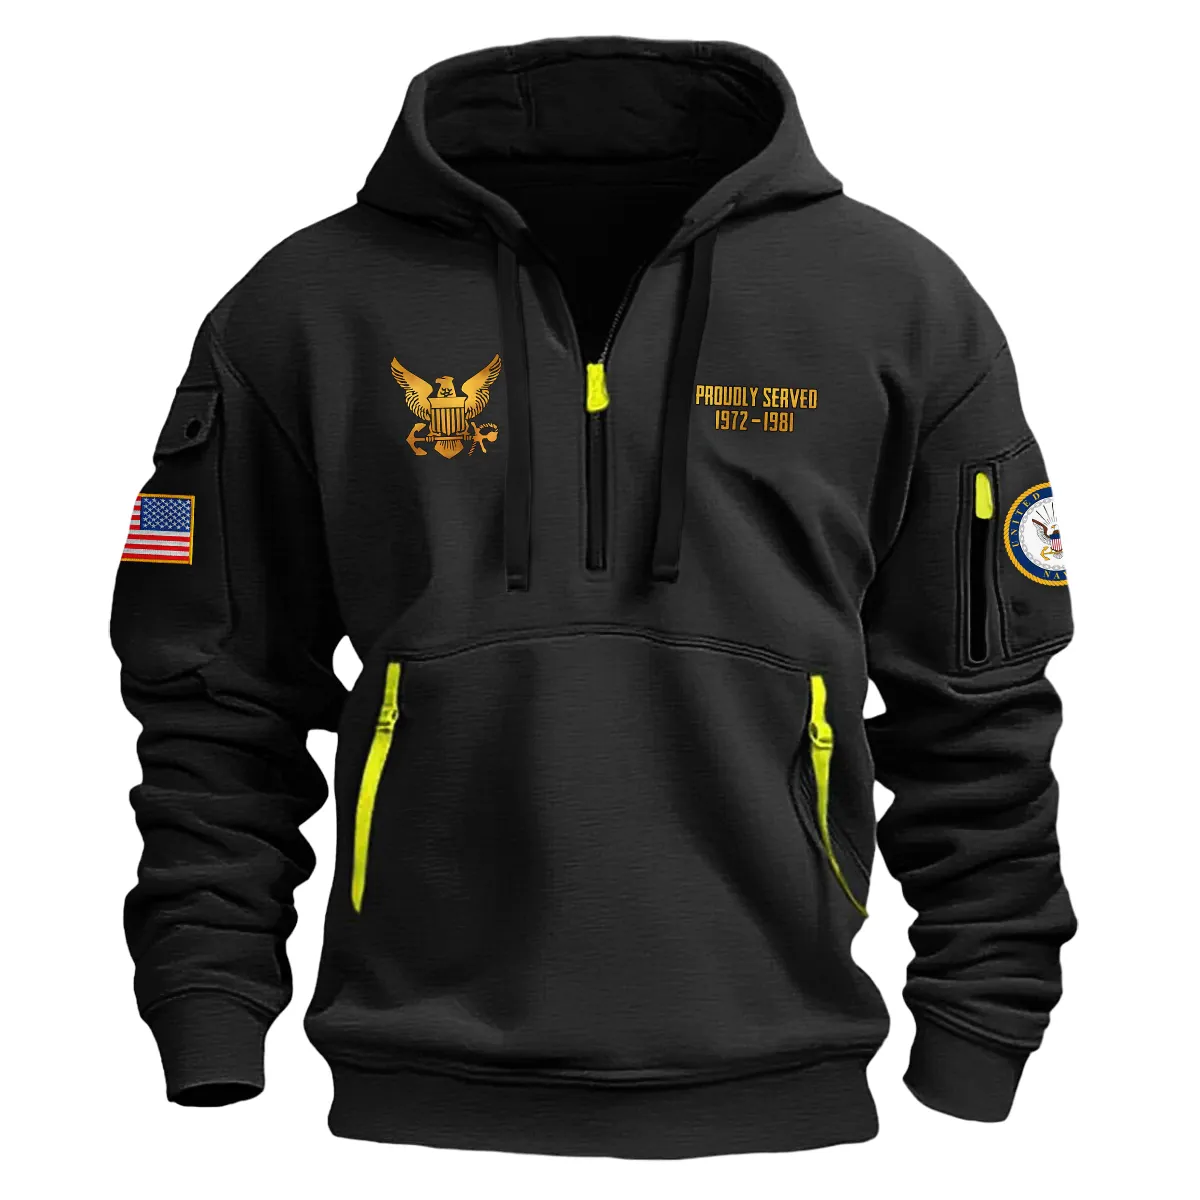 US Military All Branches! Personalized Gift Petty Officer 2nd Class U.S. Navy Fashion Hoodie Half Zipper